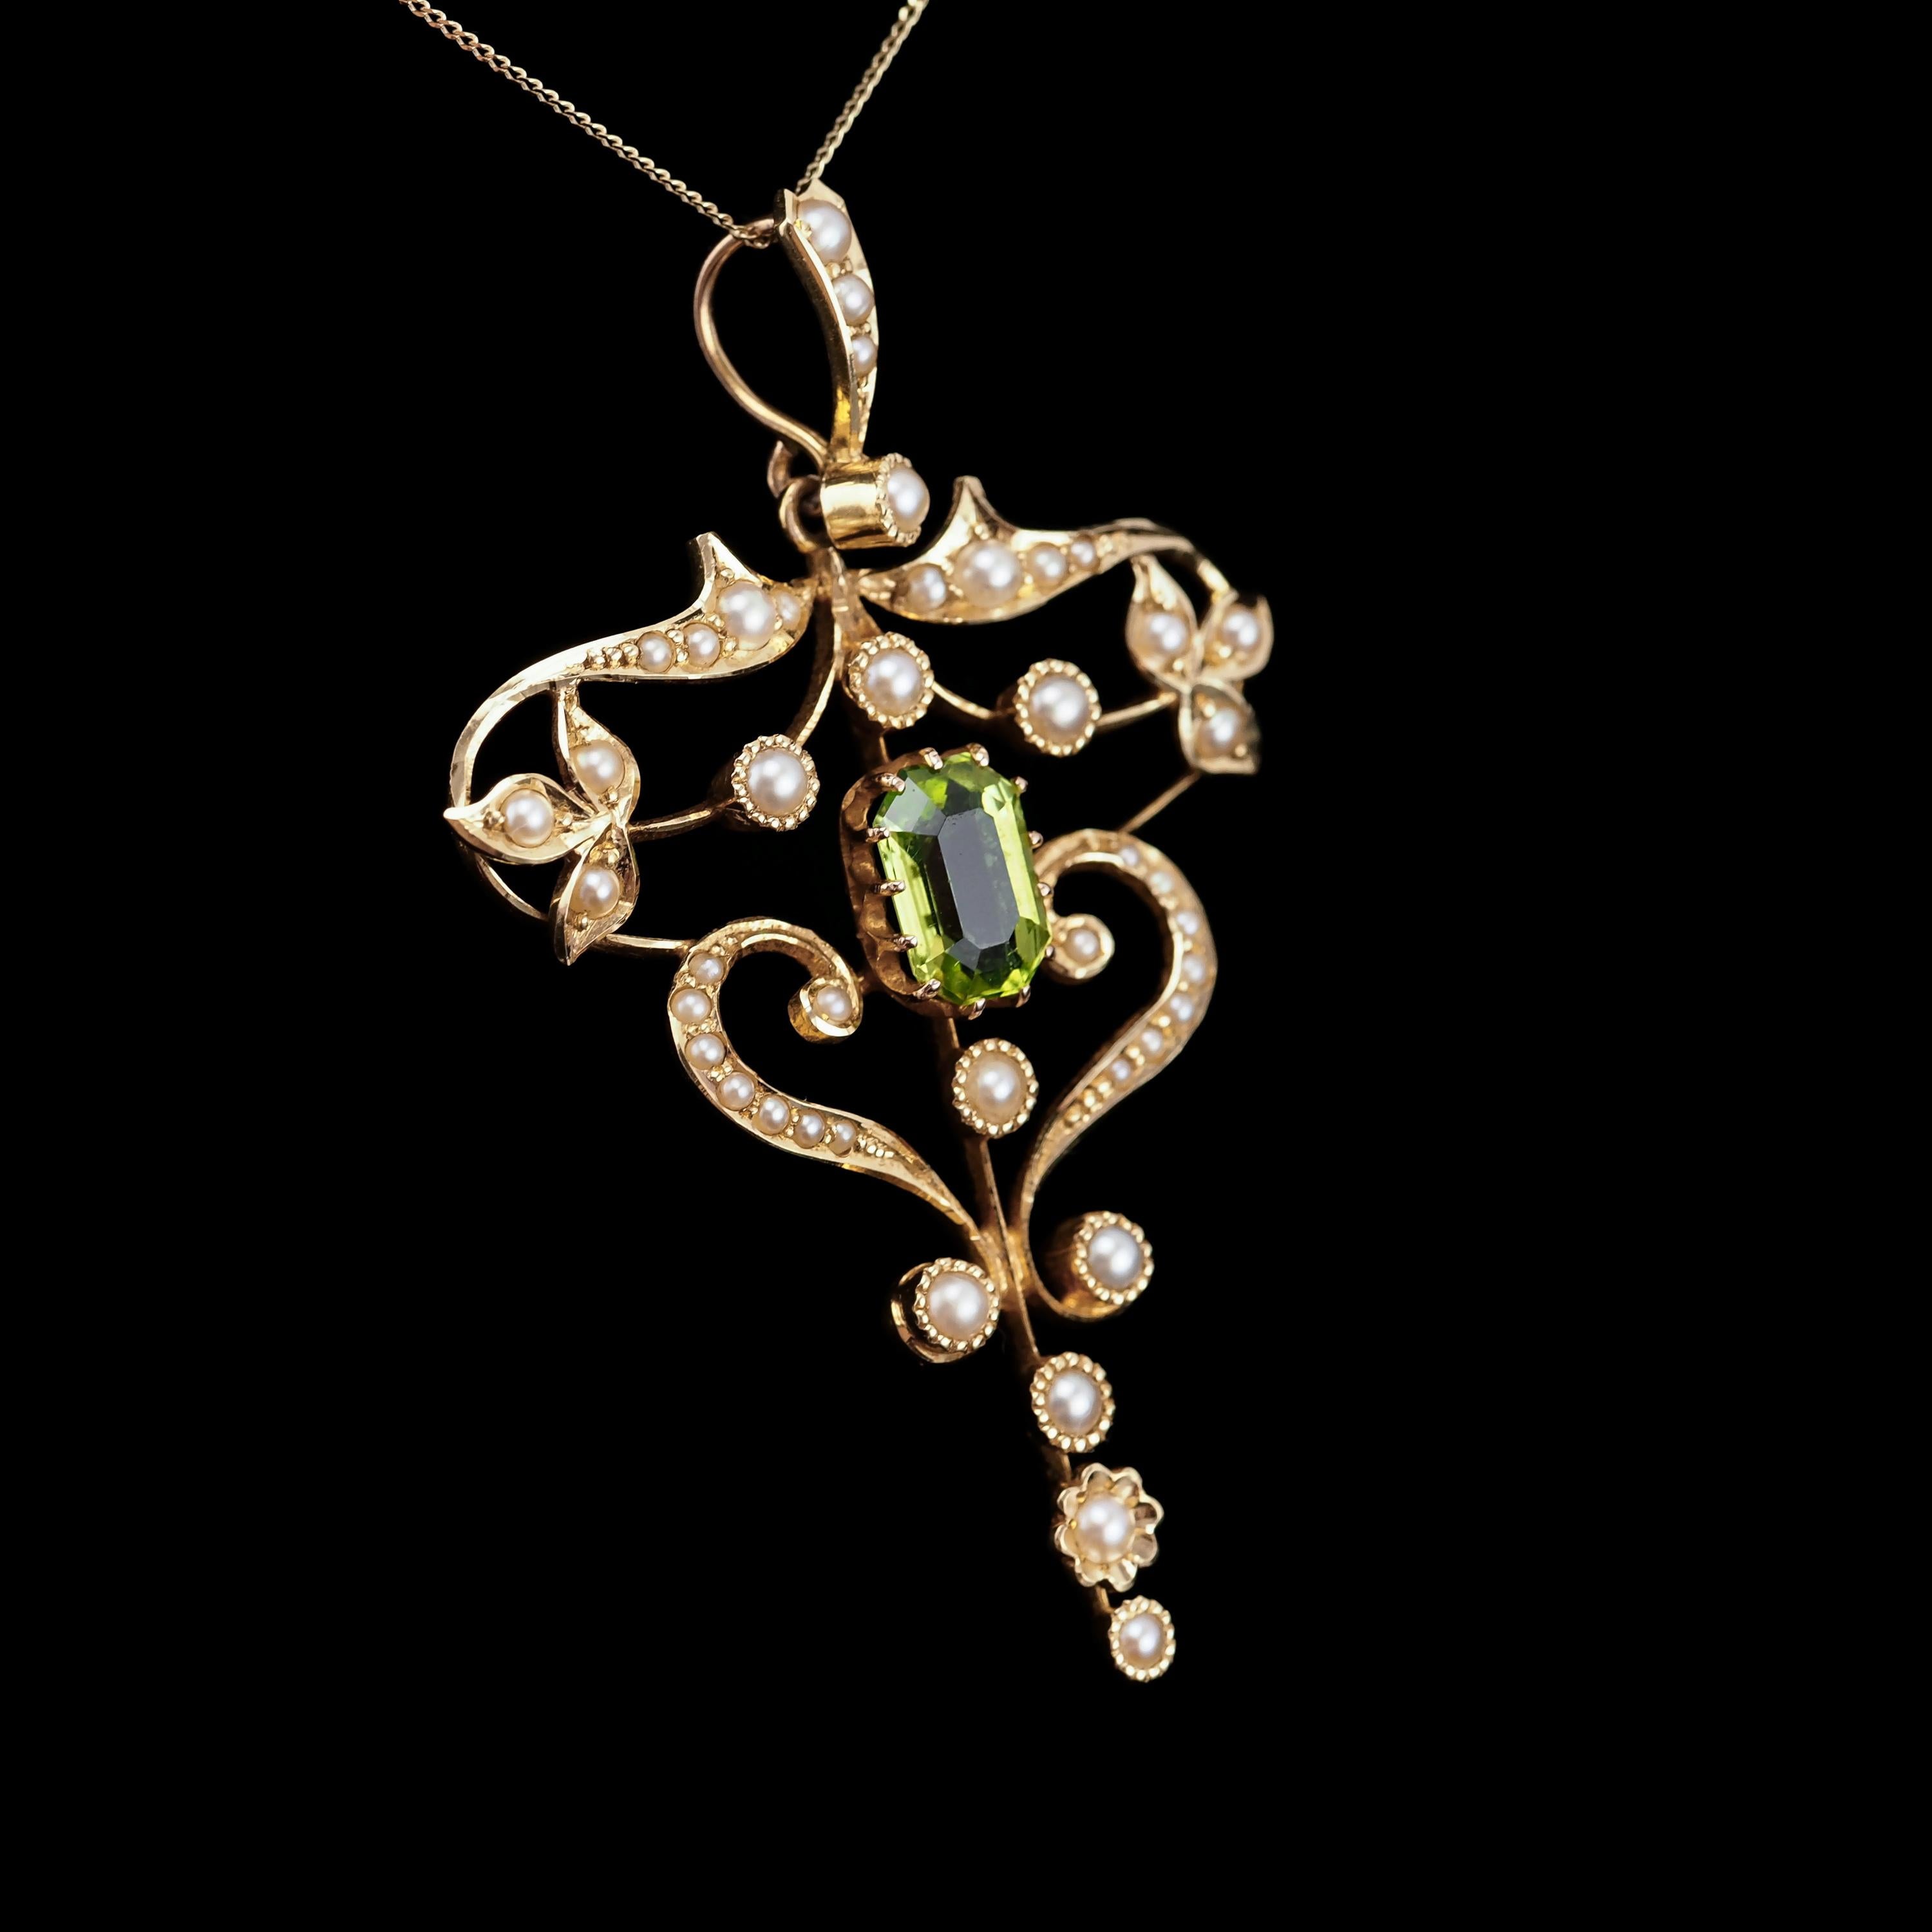 We are delighted to offer this lovely antique 15ct gold peridot and pearl necklace made in the Edwardian era c.1910.

Distinguished in style and unapologetically antique, this pendant features the most wonderful of Edwardian decorations and